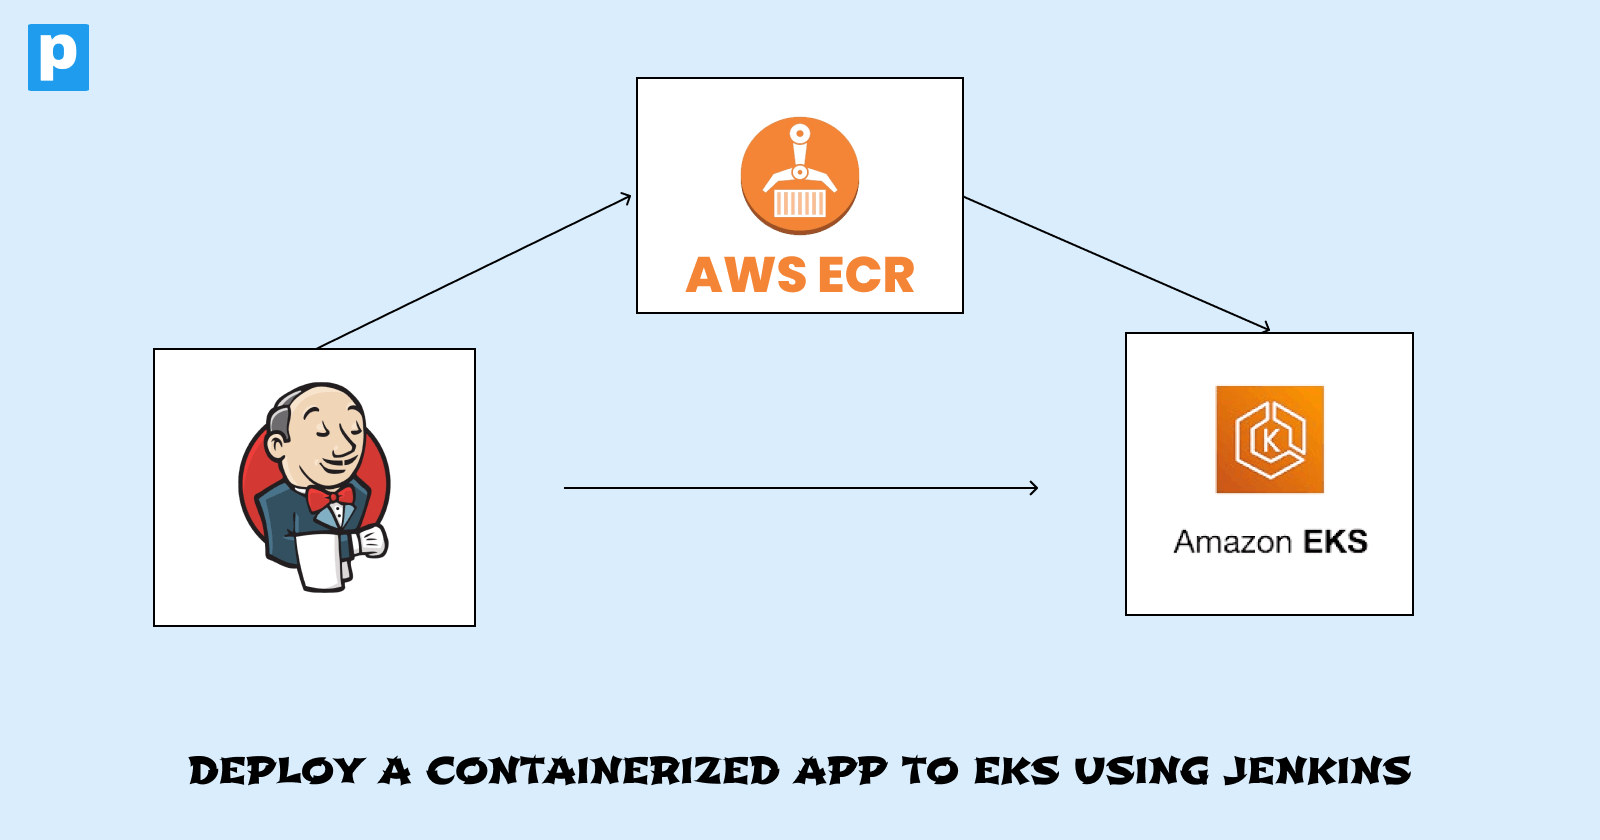 How to Deploy a Containerized Application to Amazon EKS Using a Jenkins Pipeline